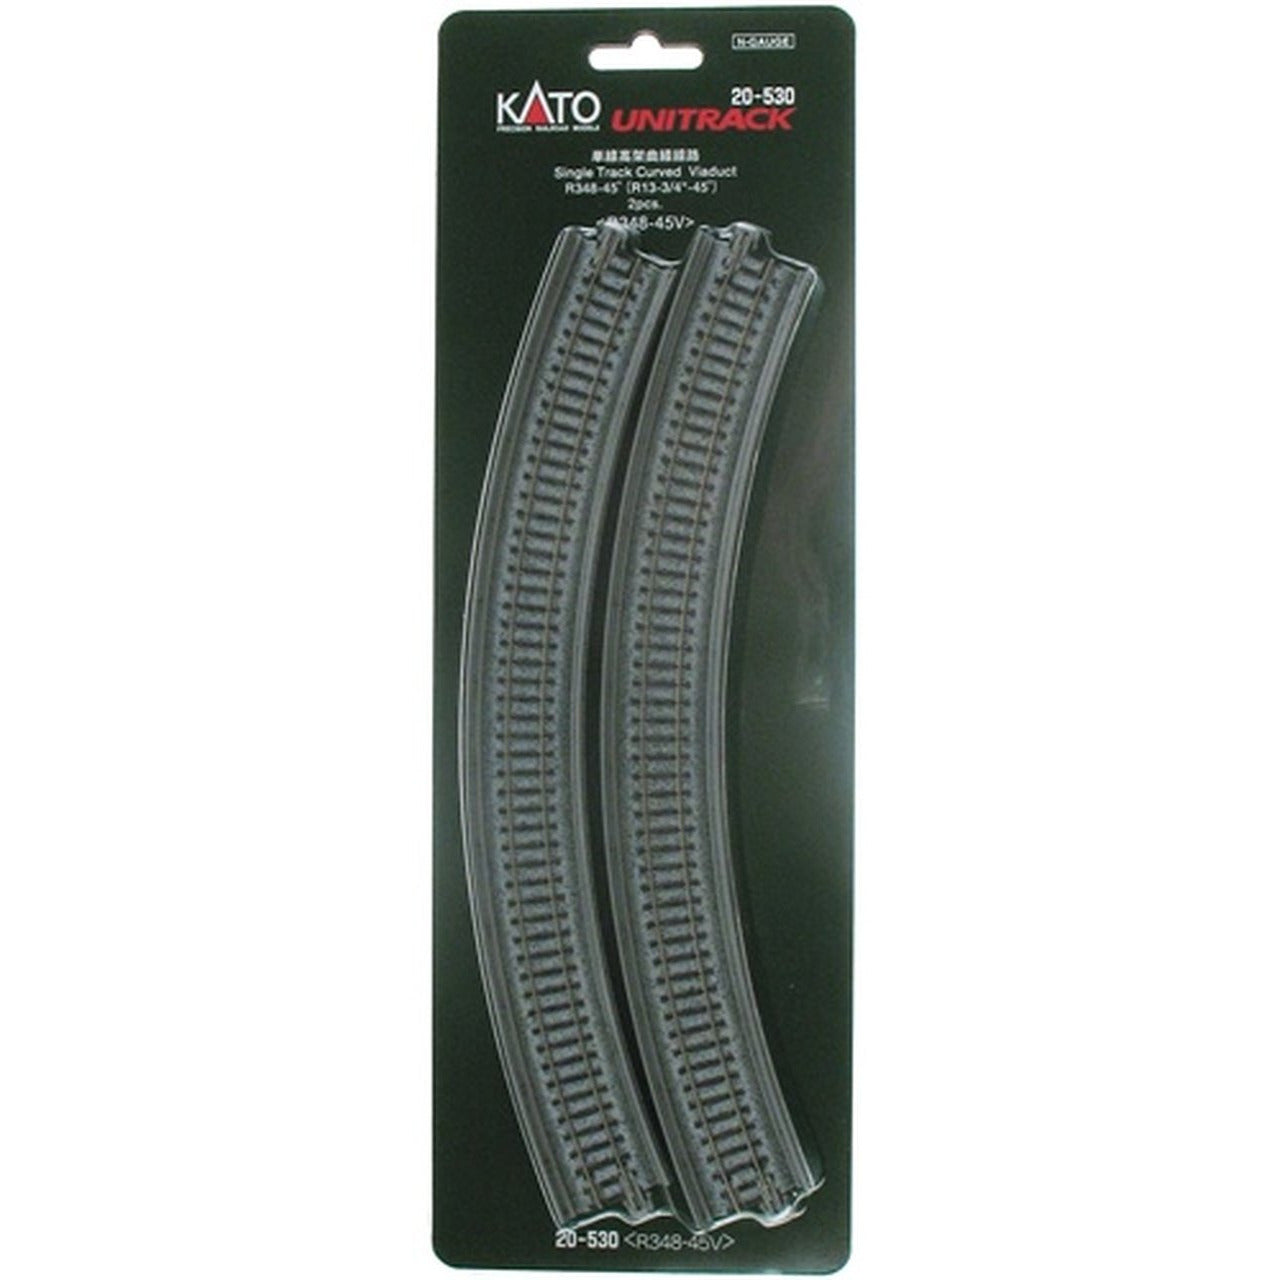 UniTrack N Curved Single Track Viaduct Track R13 3/4" - 45° 2 Pieces